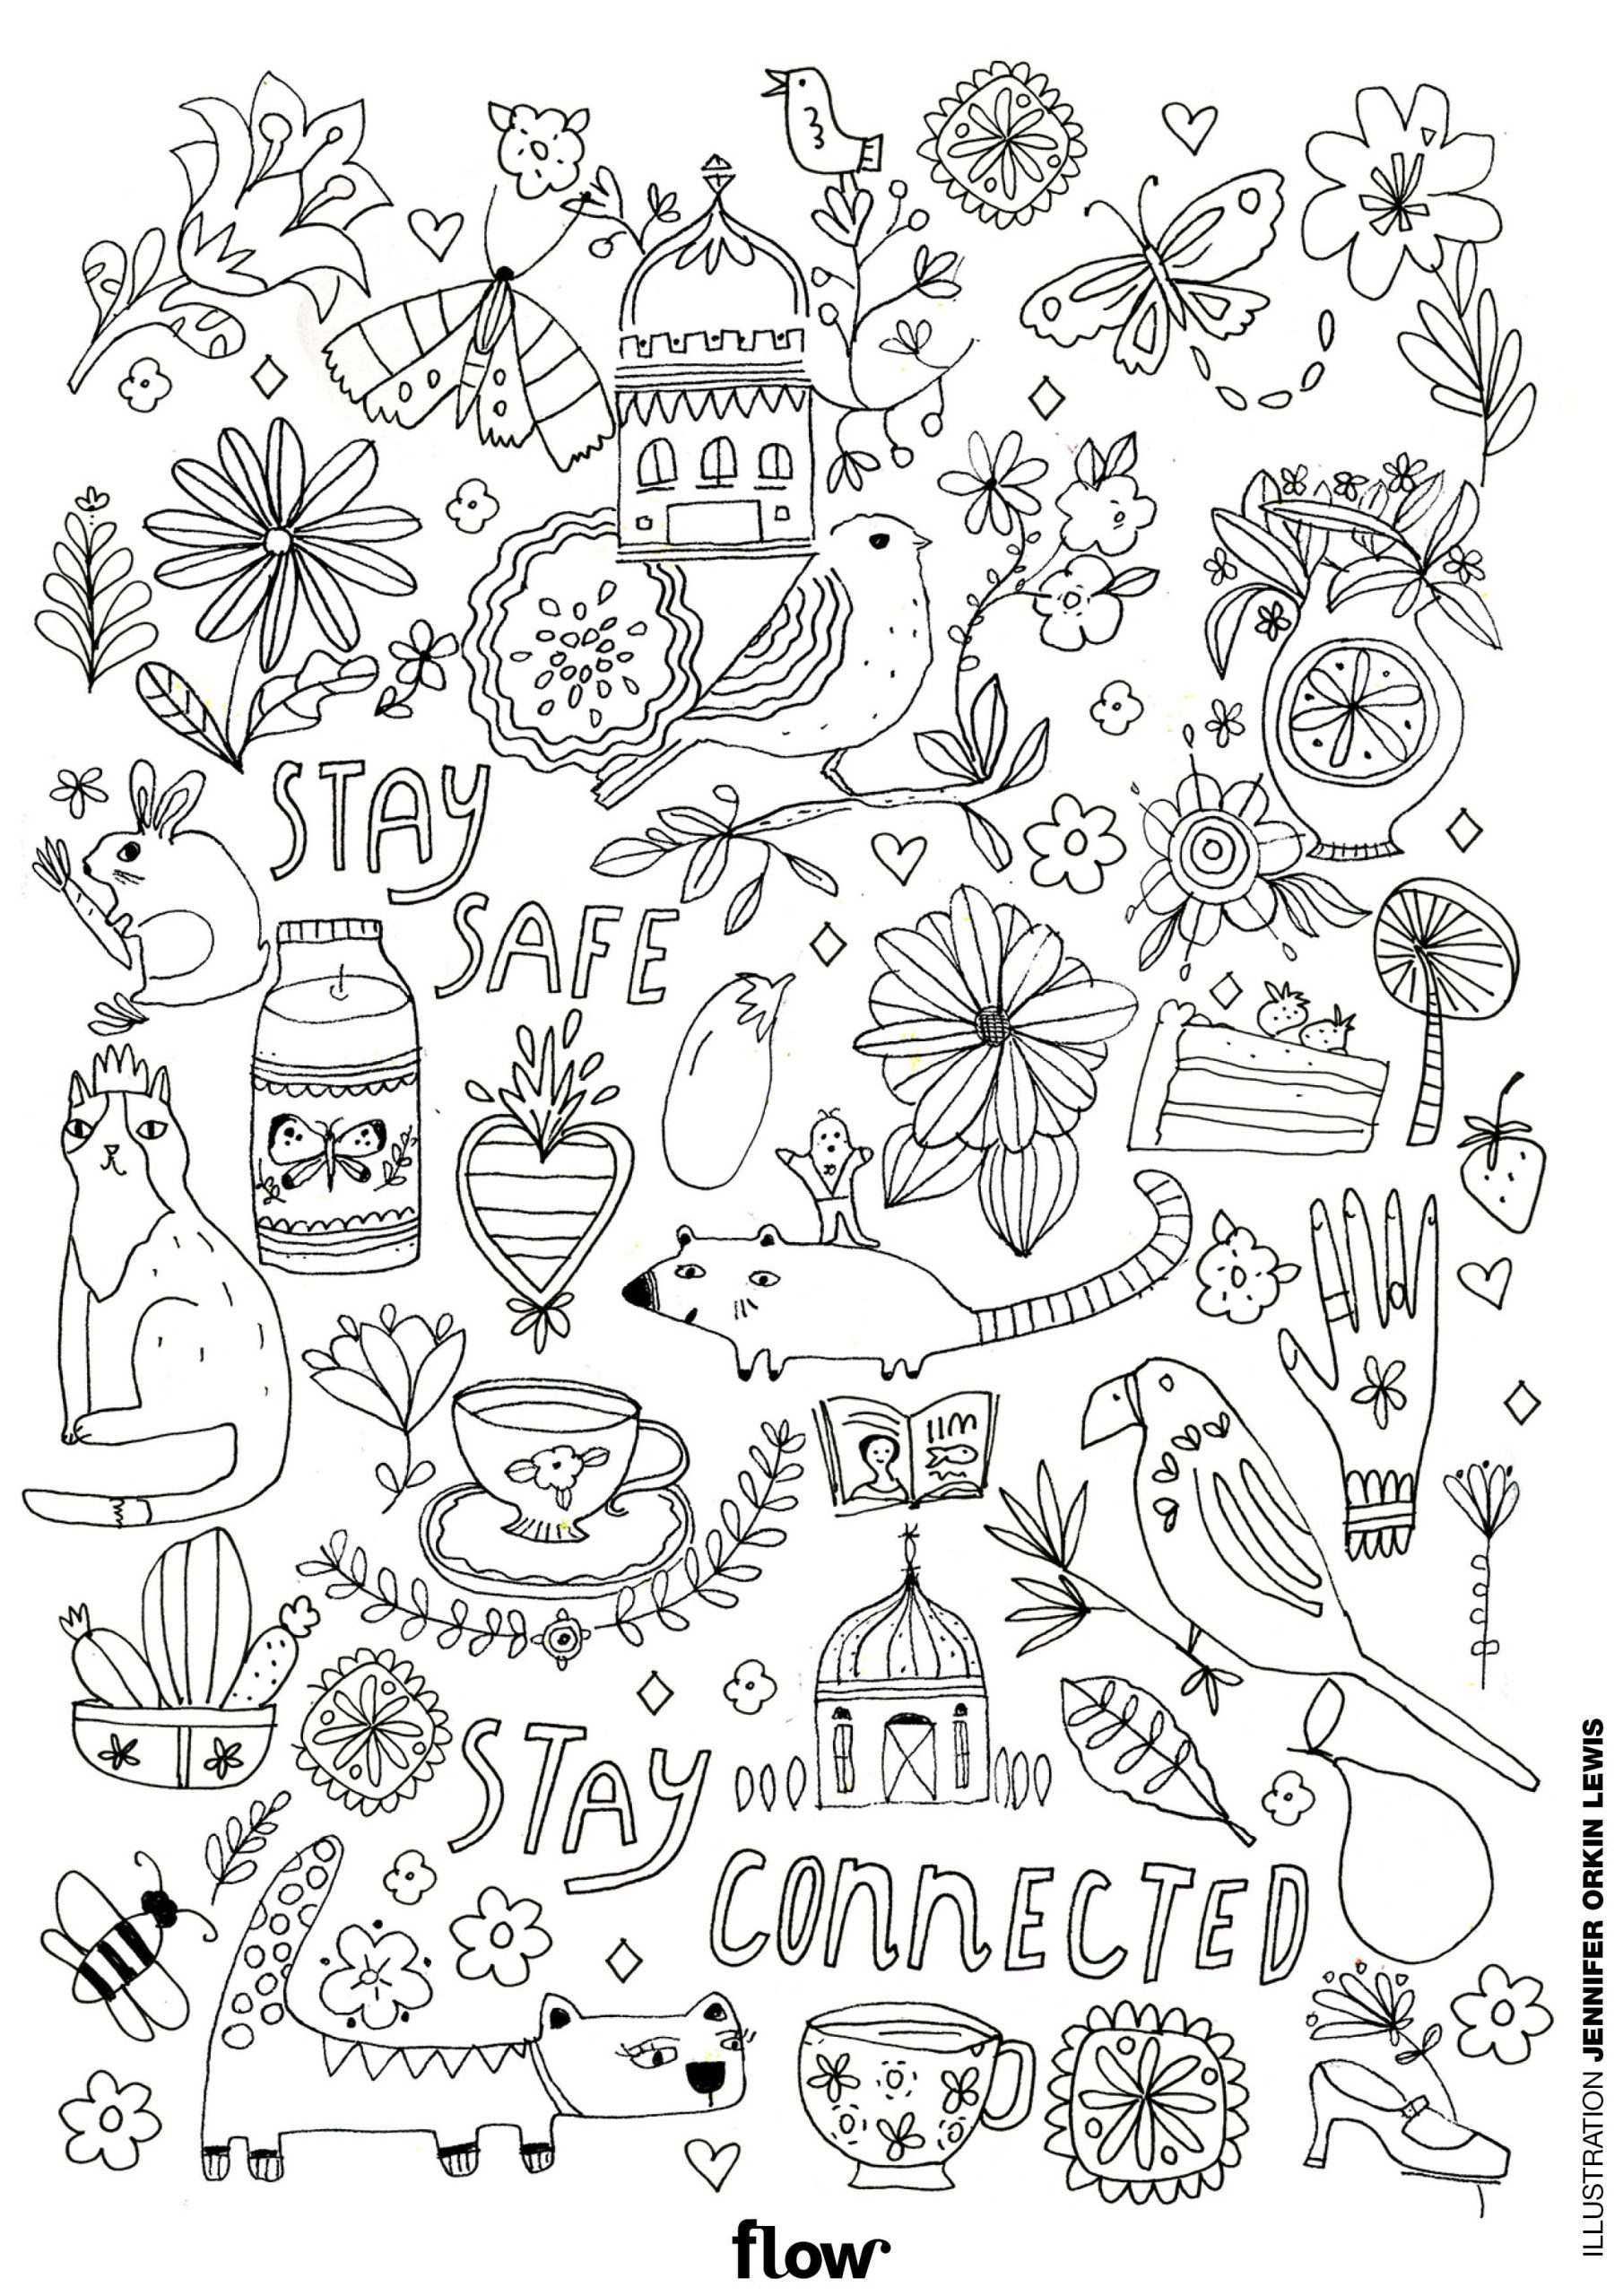 Comforting coloring page - Jennifer Orkin Lewis - Flow Magazine